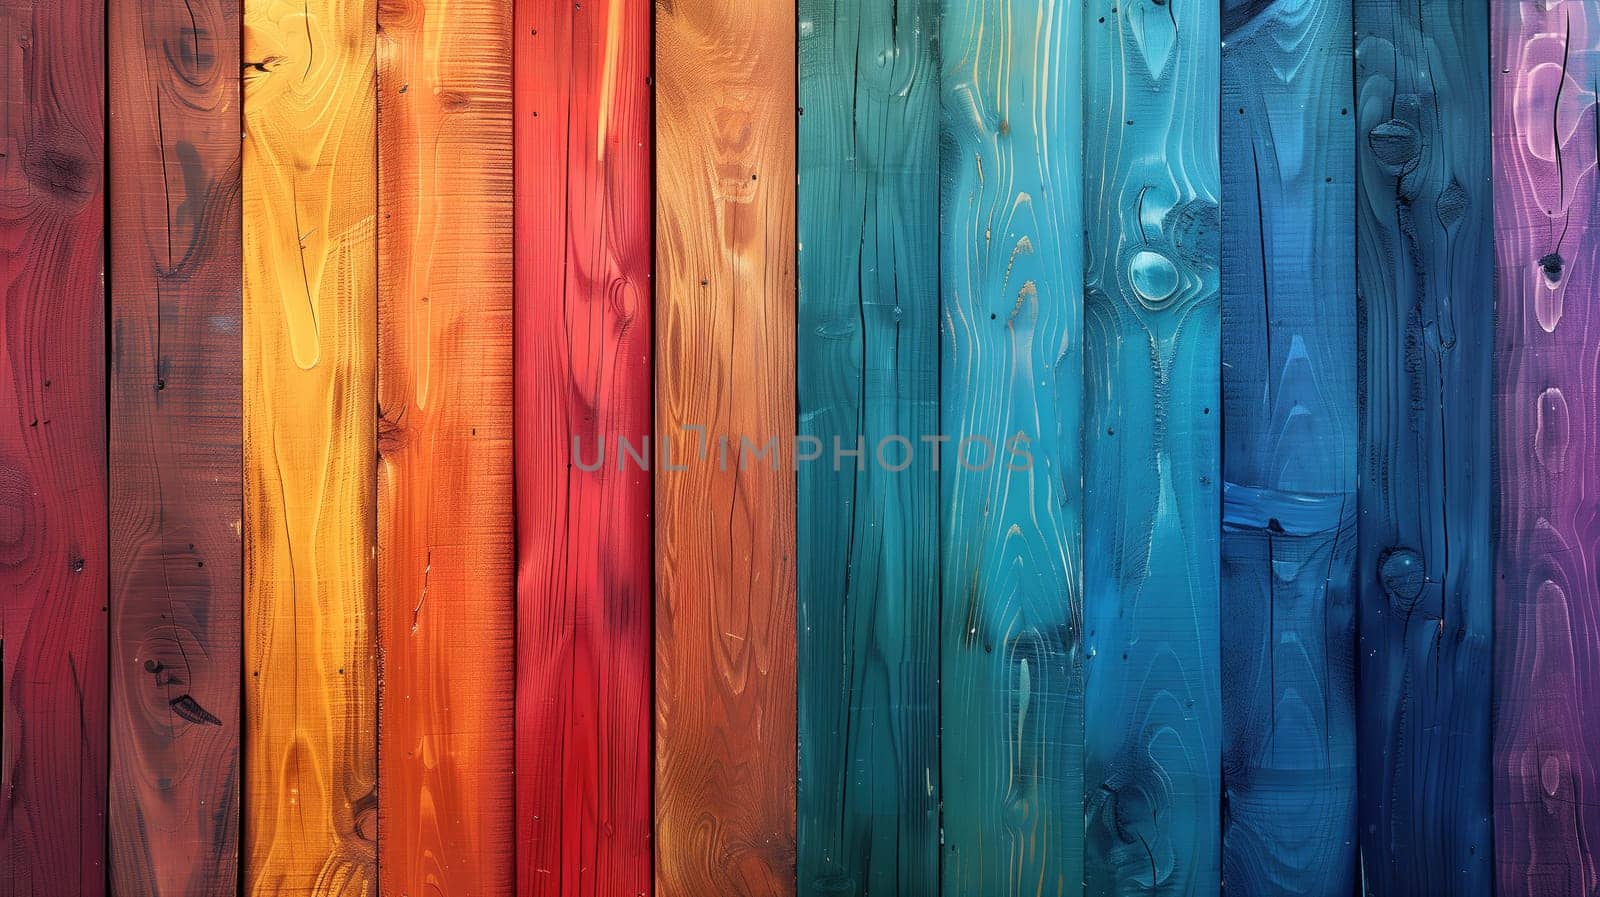 Rainbow Colored Wooden Fence Representing LGBT Pride by TRMK